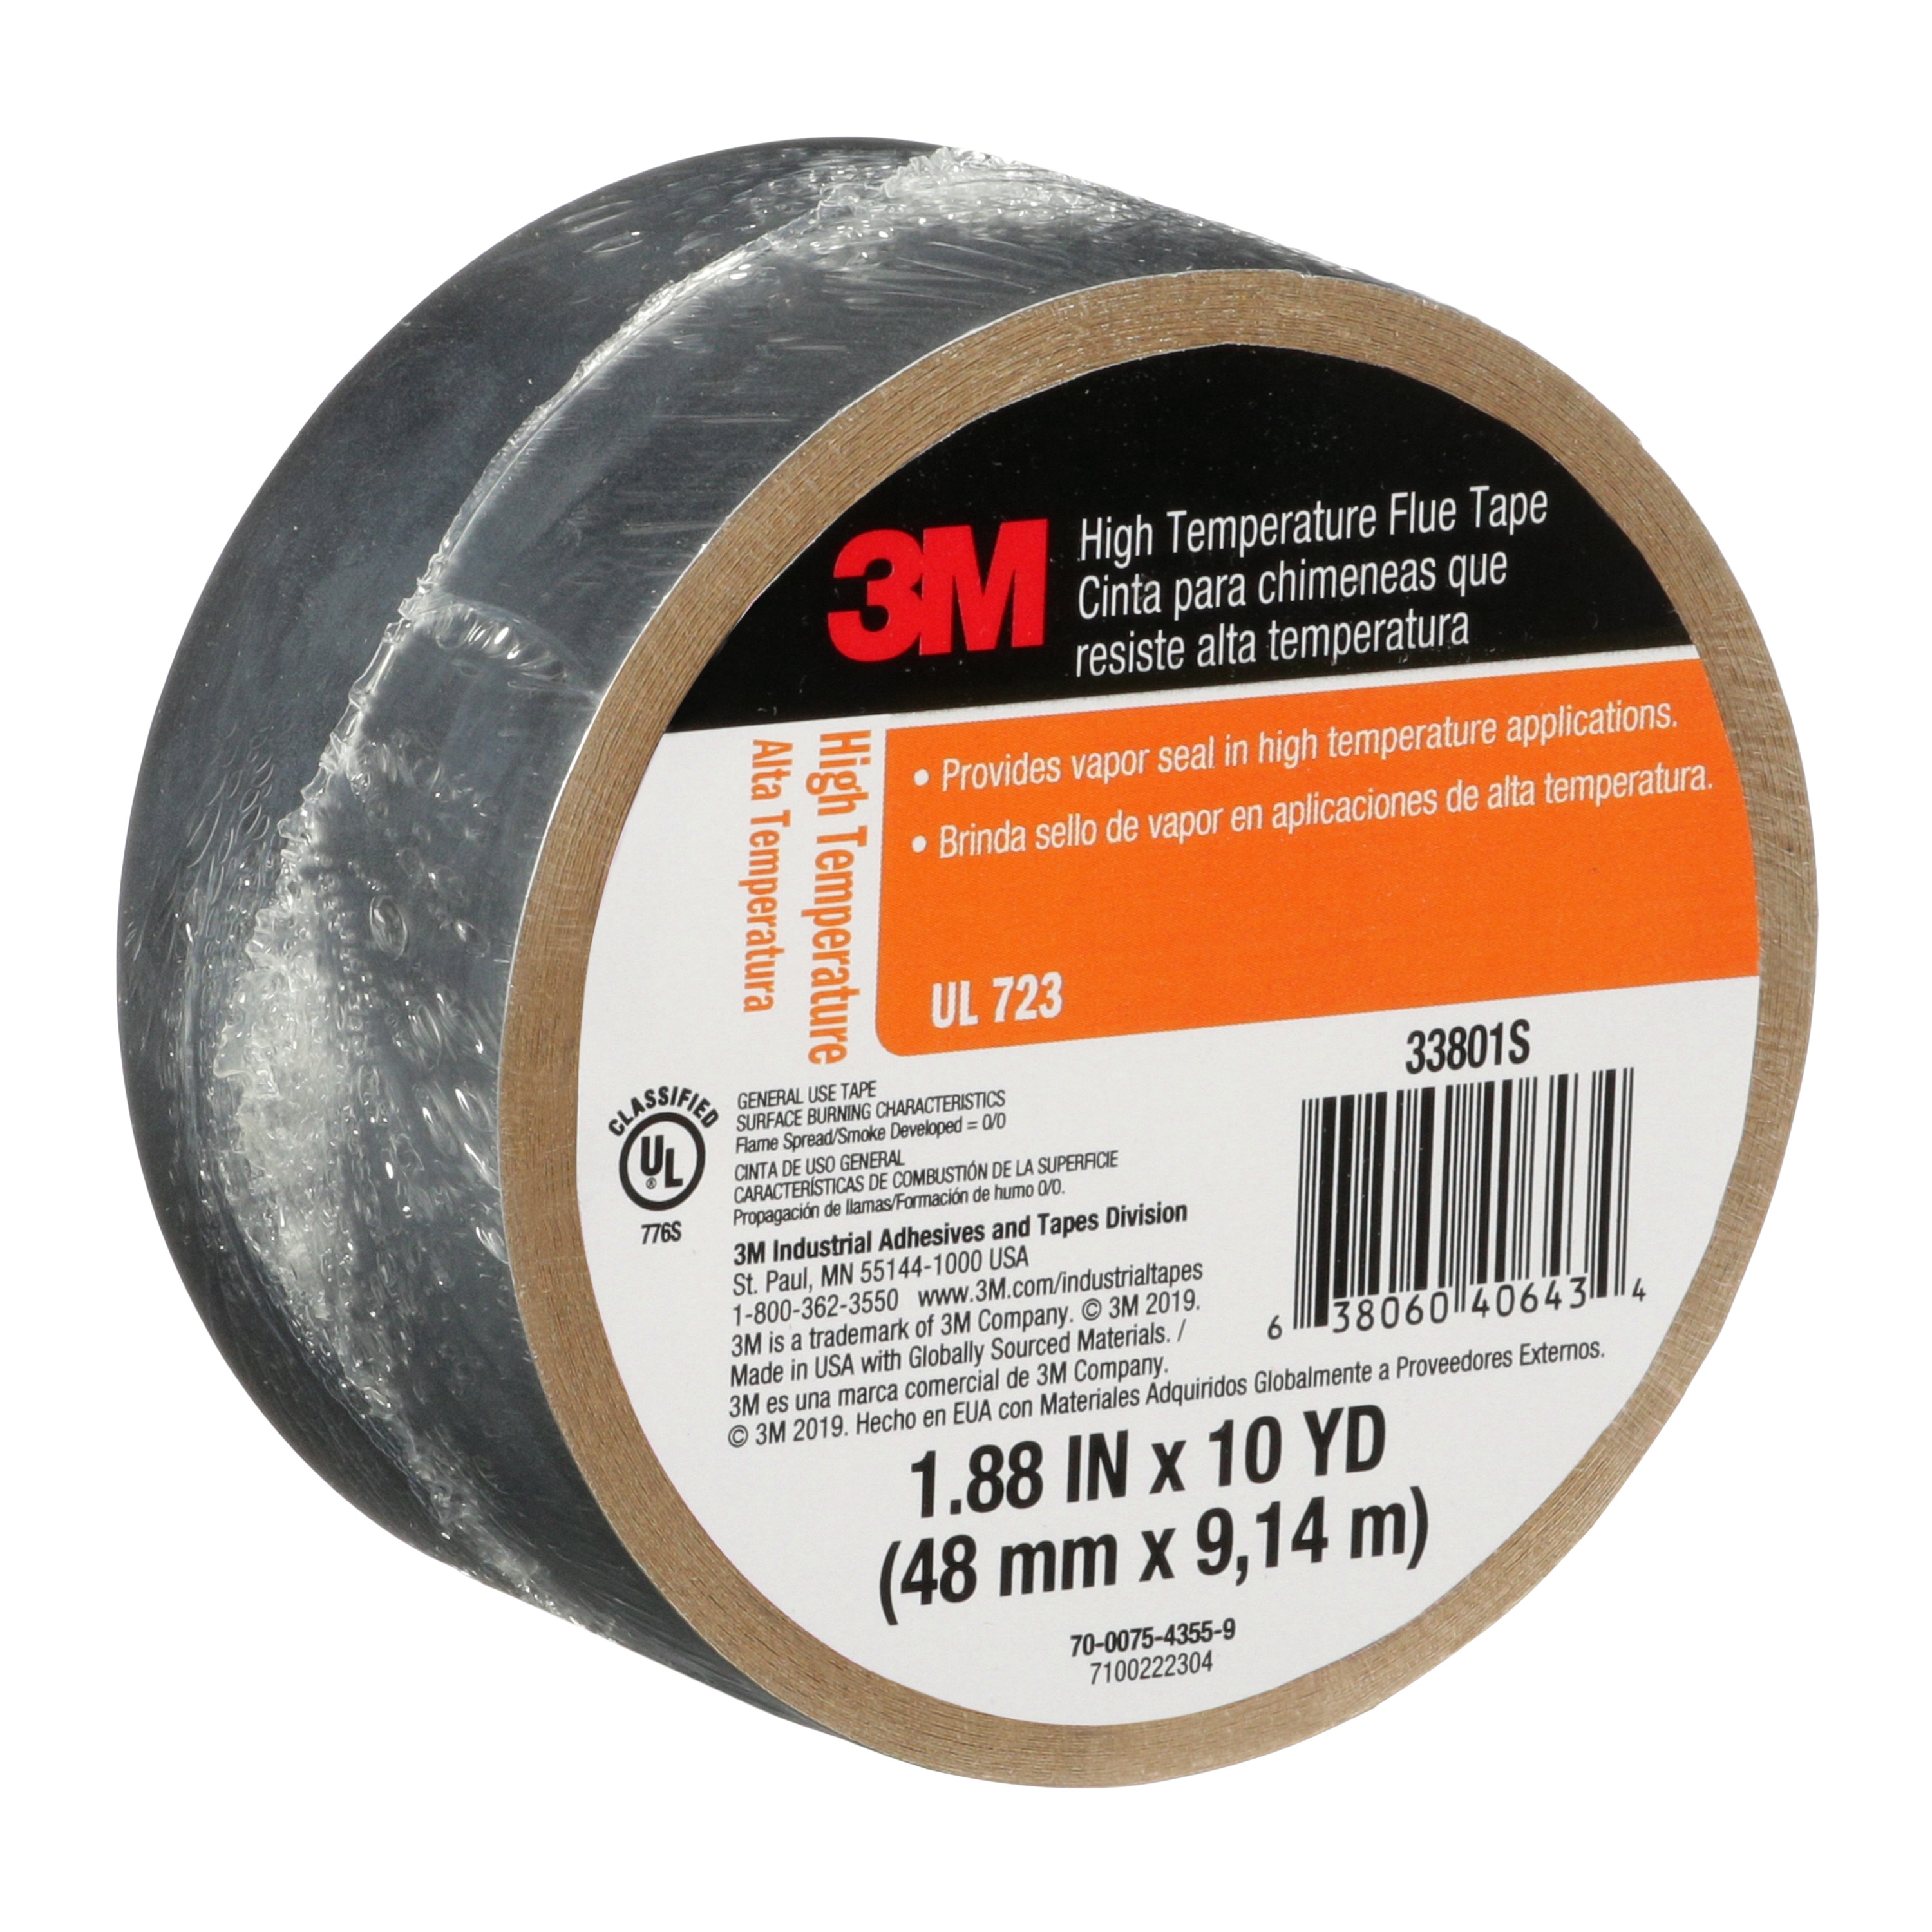 3M High Temperature FLUE TAPE Seals Leaks Hot Air Ducts 1.5" x 5 Yd 2113NA NEW!! 